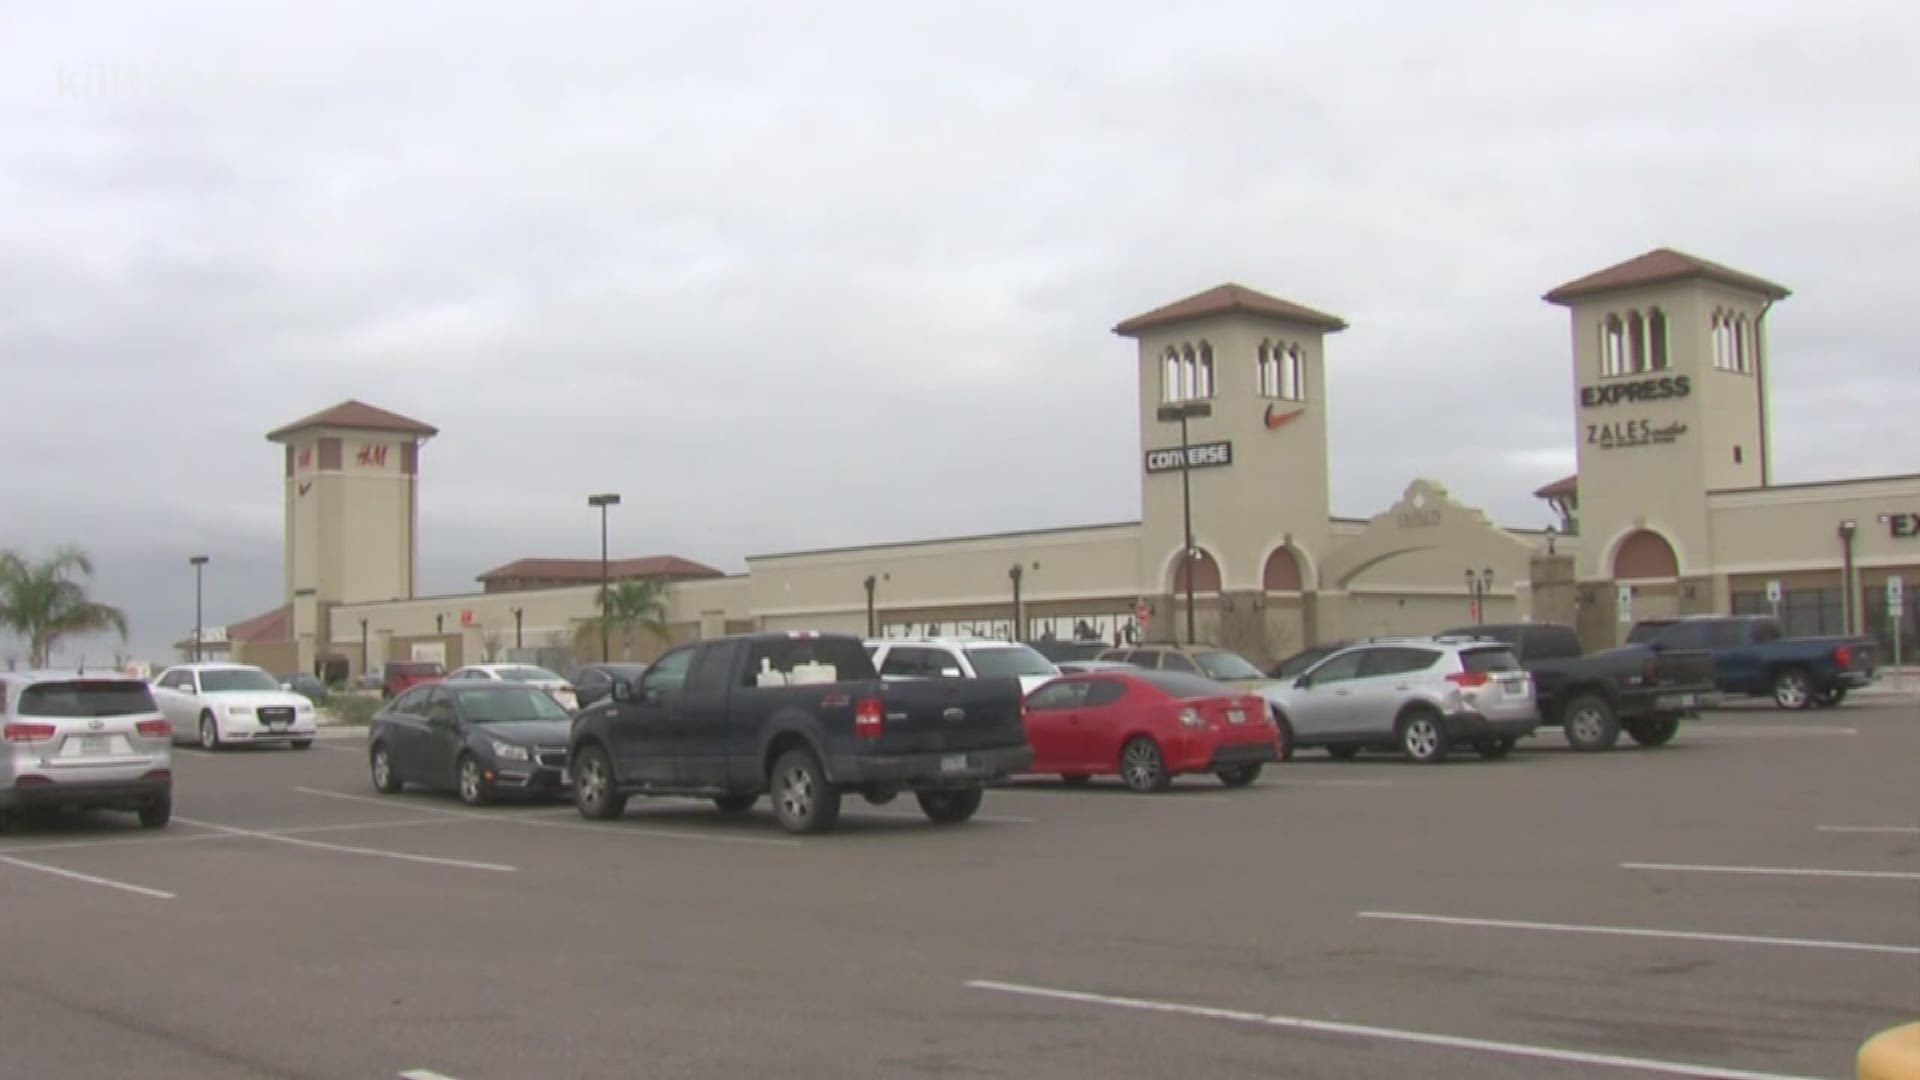 The Outlets at Corpus Christi Bay could be getting a new owner soon. On Monday, a foreclosure notice was filed with the Nueces County Clerk's Office.